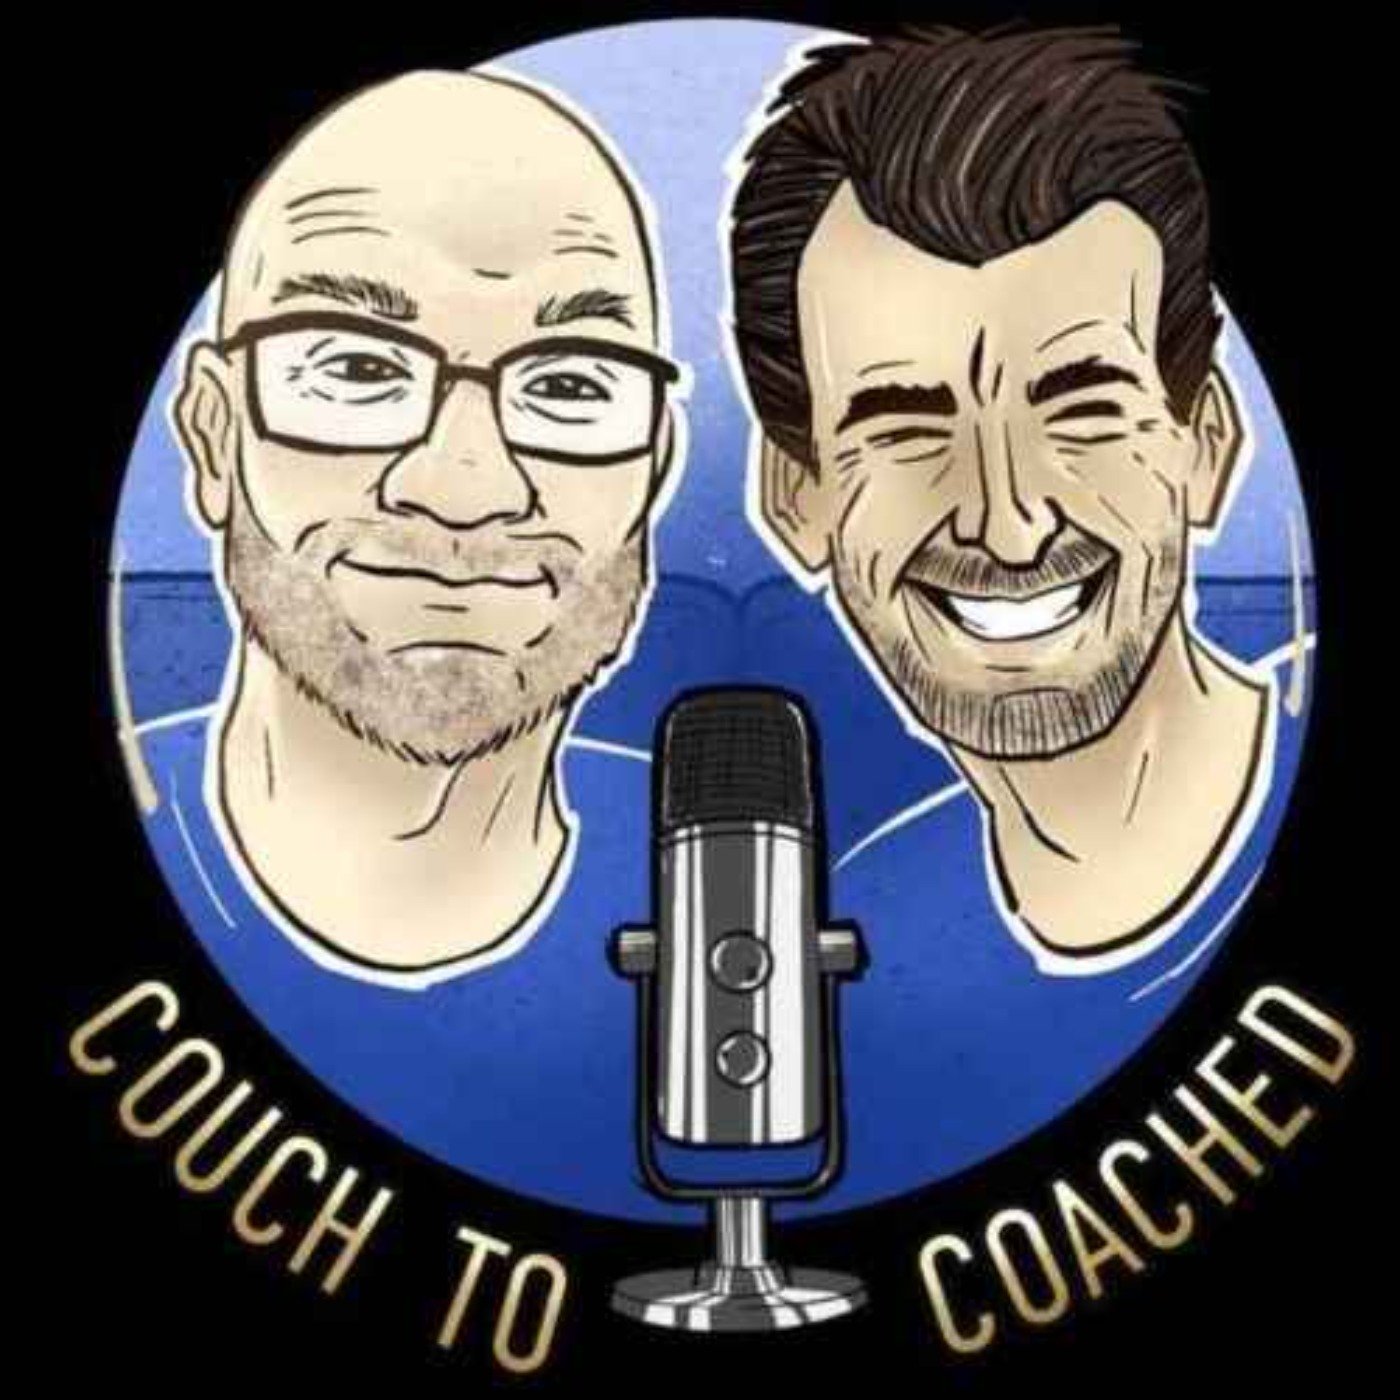 Couch to coached- Running Podcast Episode 75